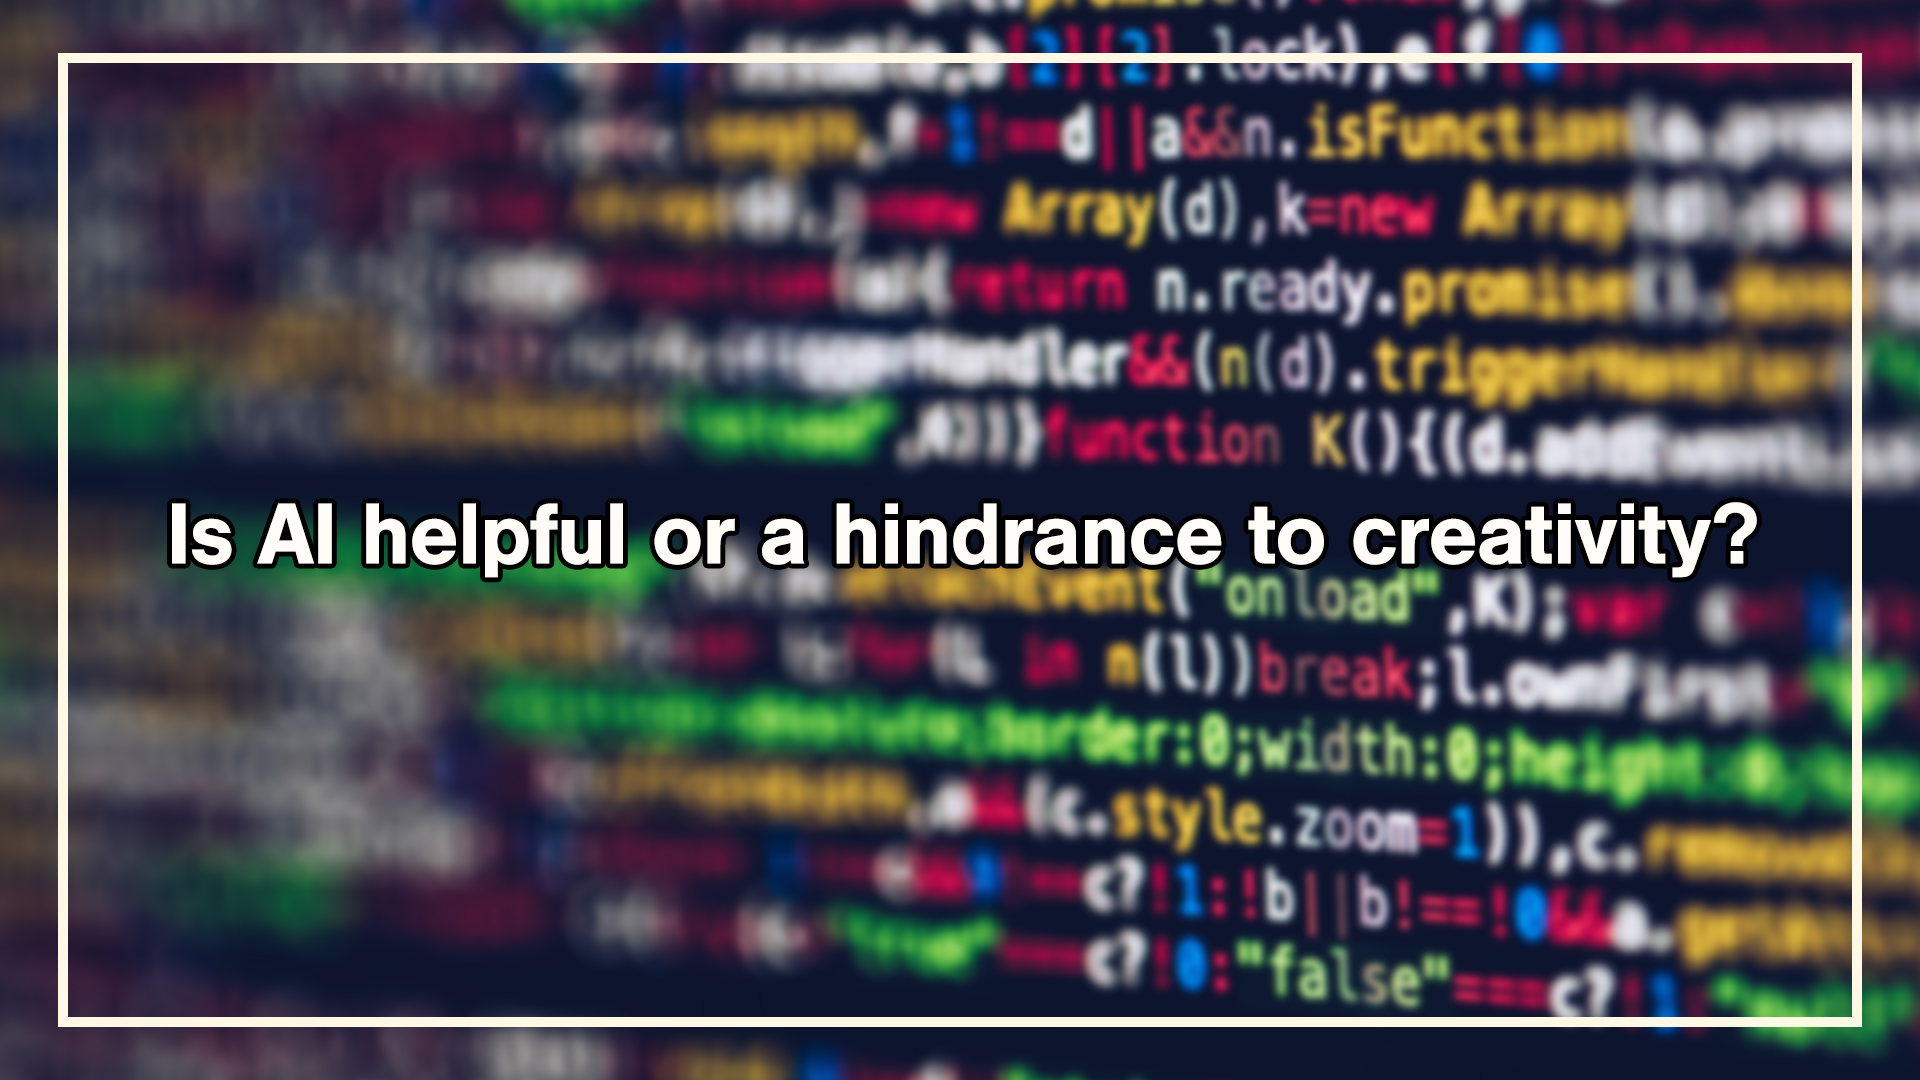 the words "is ai helpful or a hindrance to creativity" written over a blurred image of a computer screen displaying lines of code.